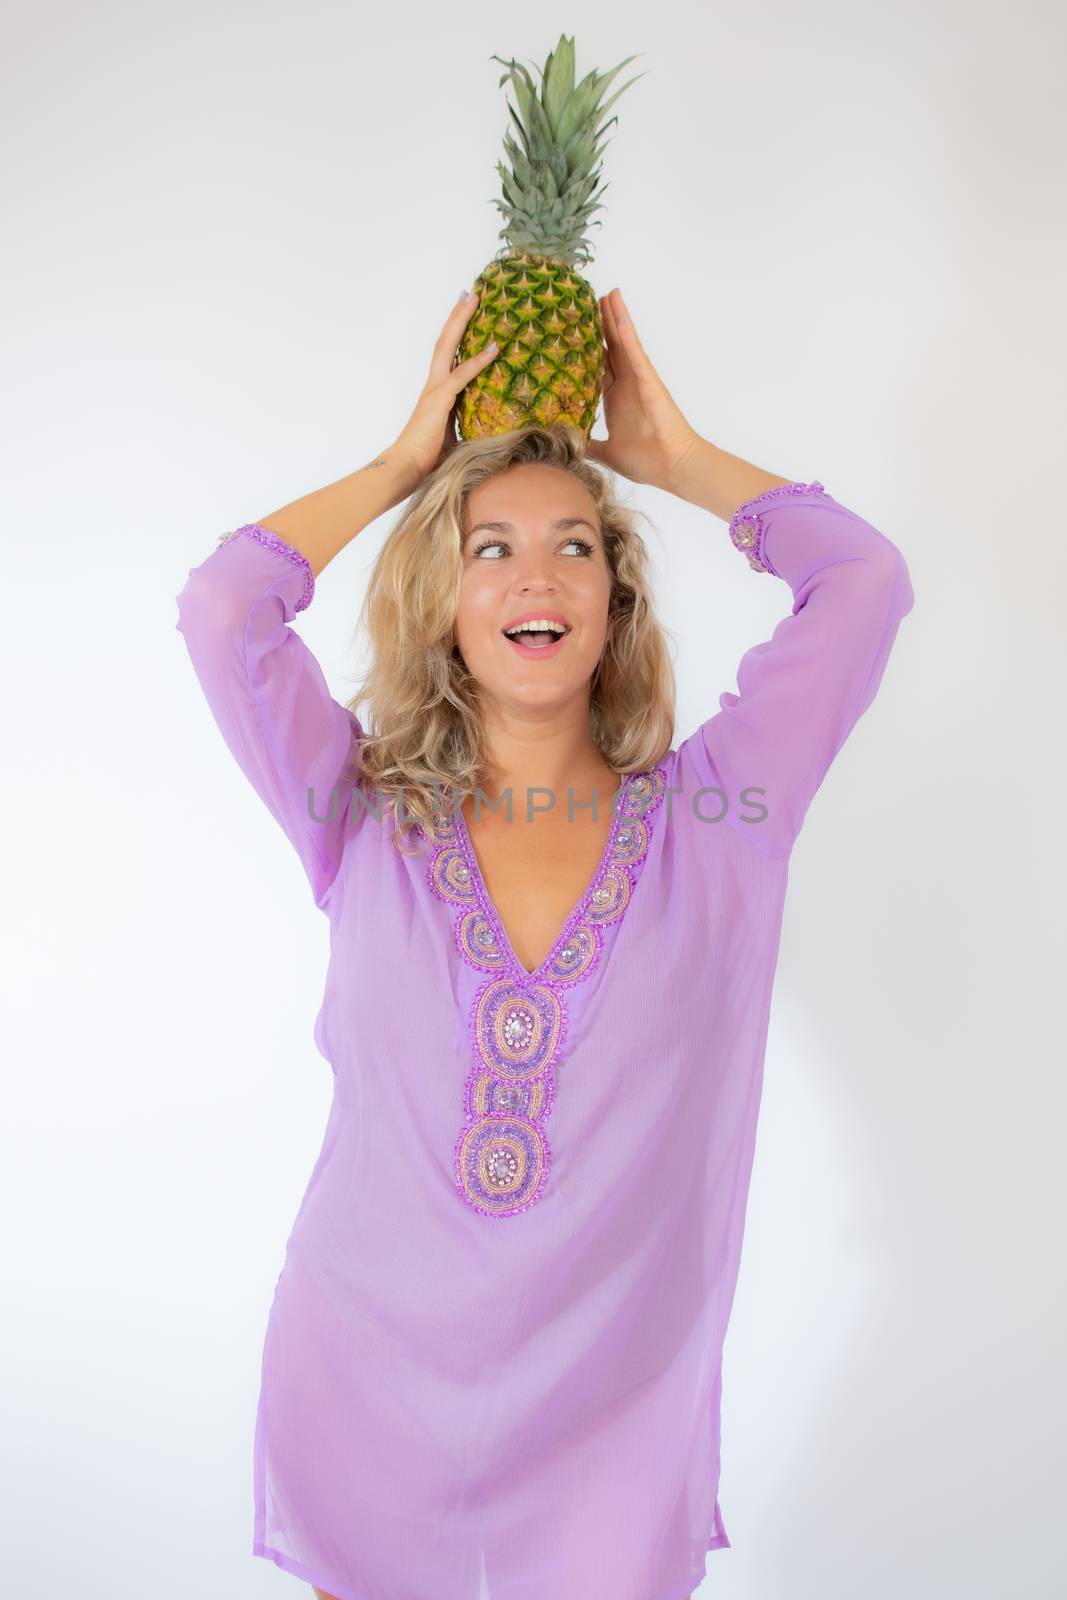 Pretty blonde woman in lila caftan smiling on white background picking up a pineapple on her head